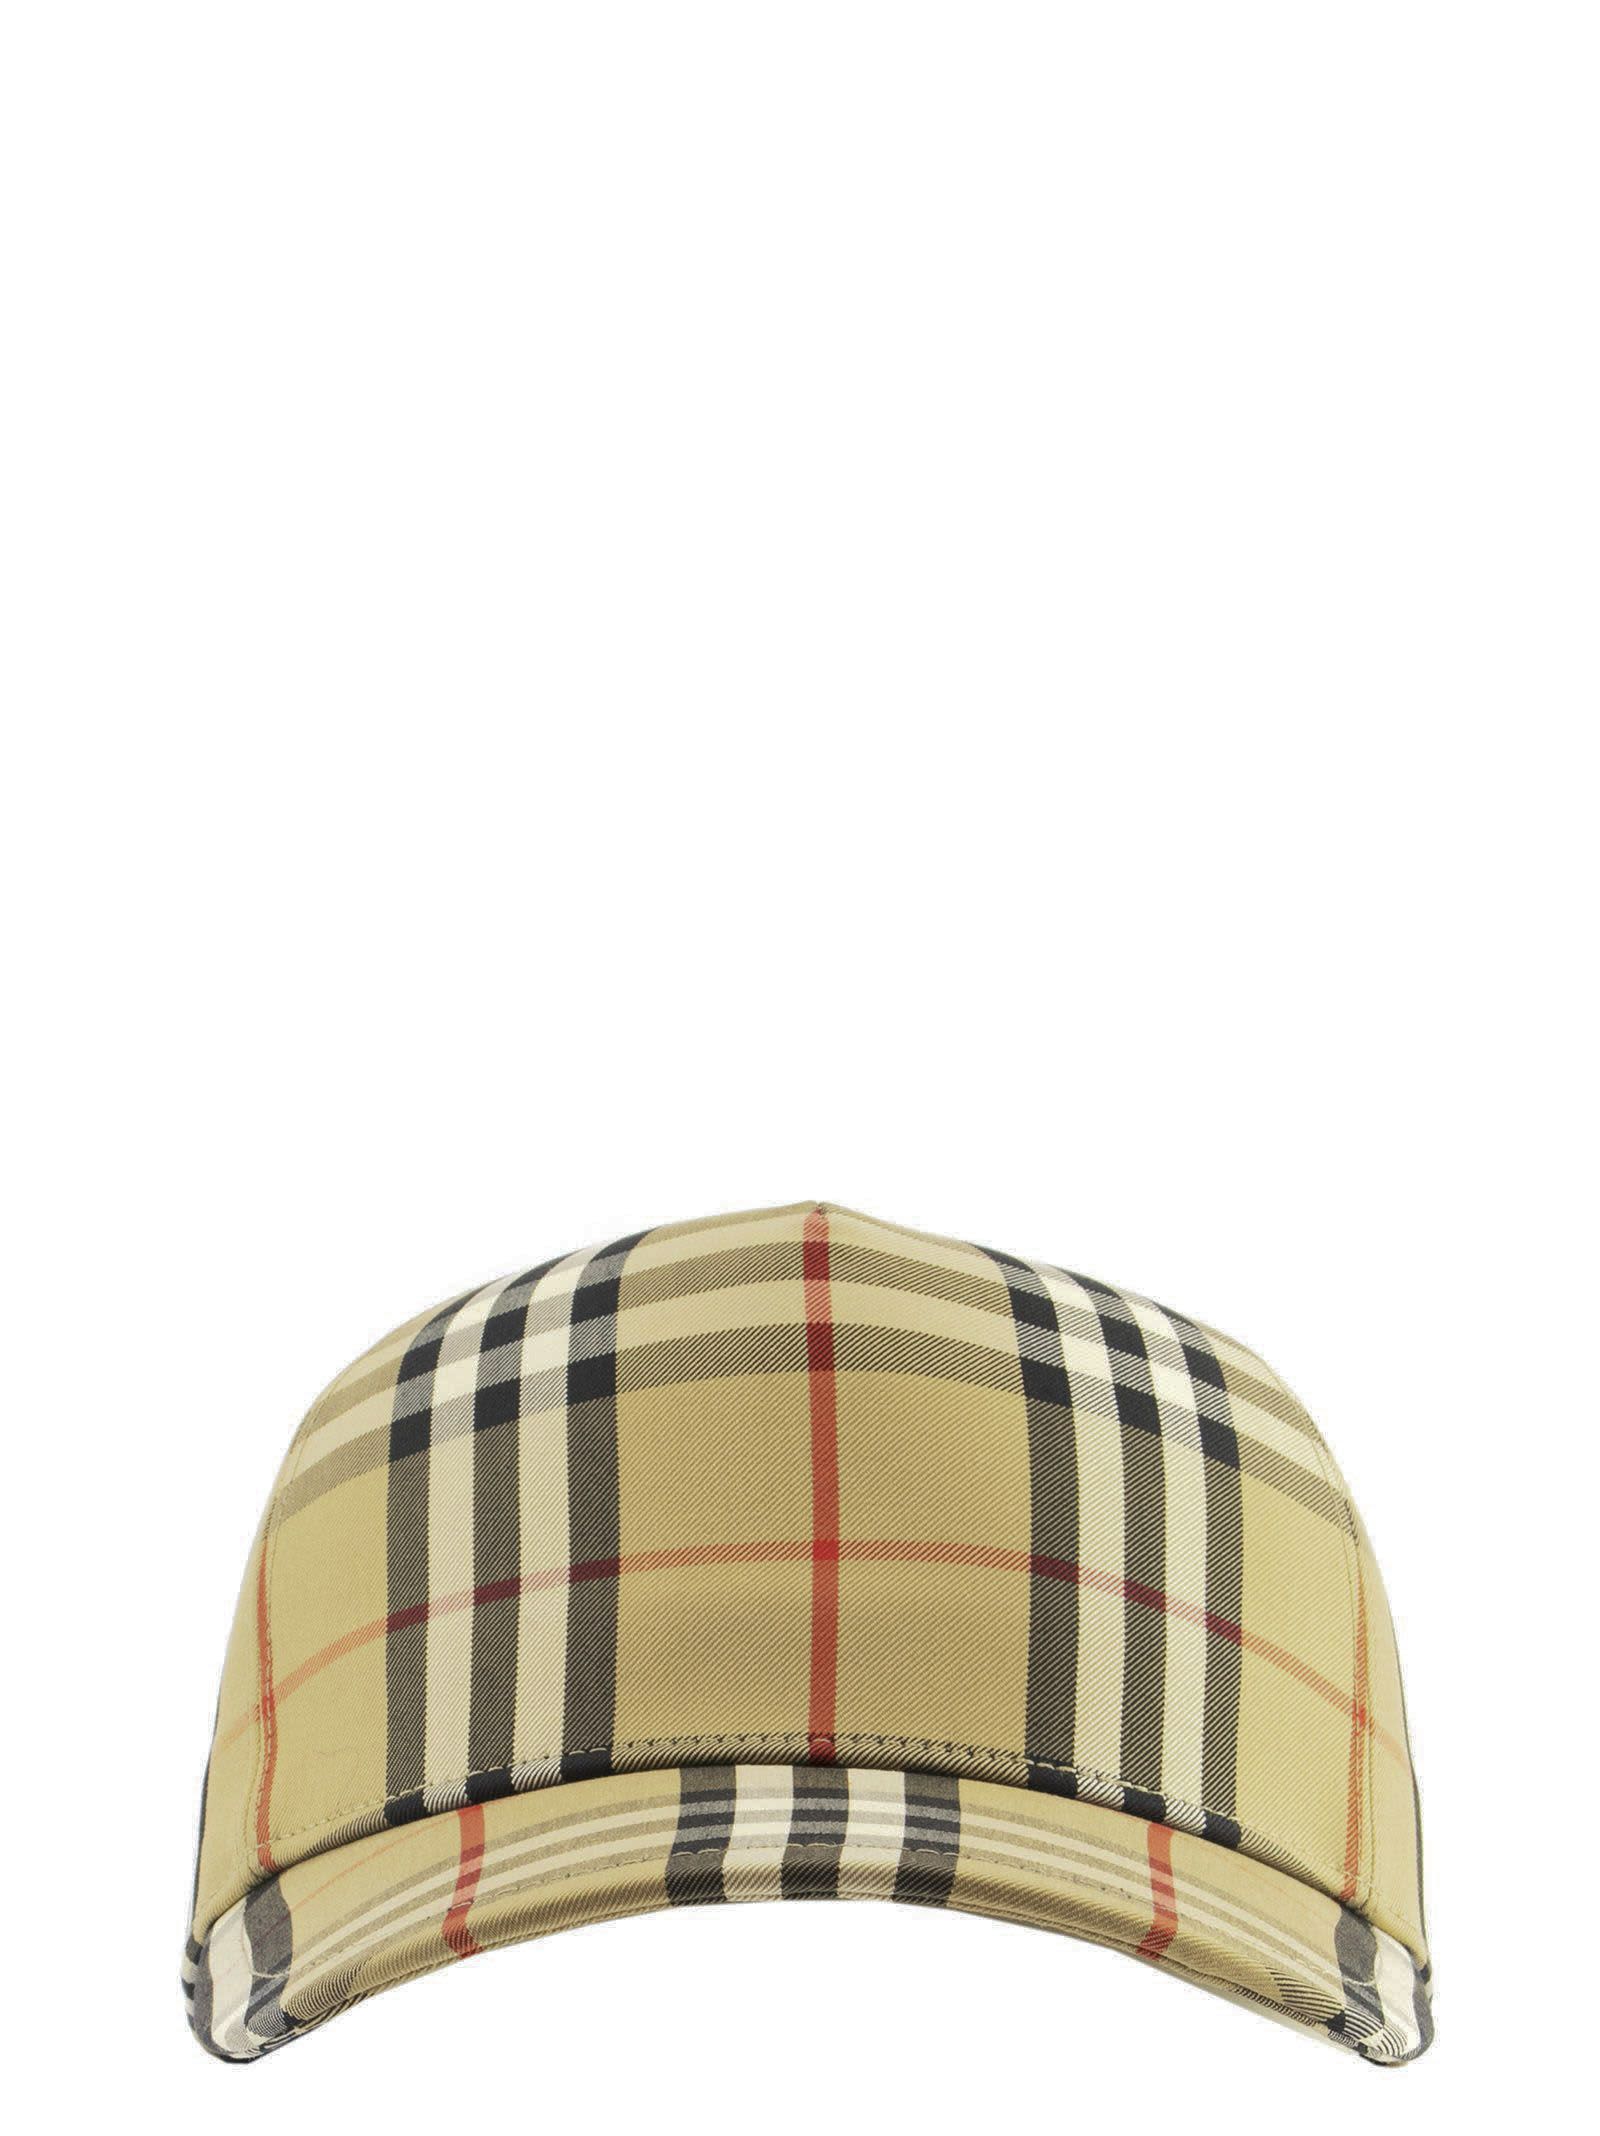 Burberry Trucker Cap - Baseball Cap With Vintage Check Pattern And Logo Patch